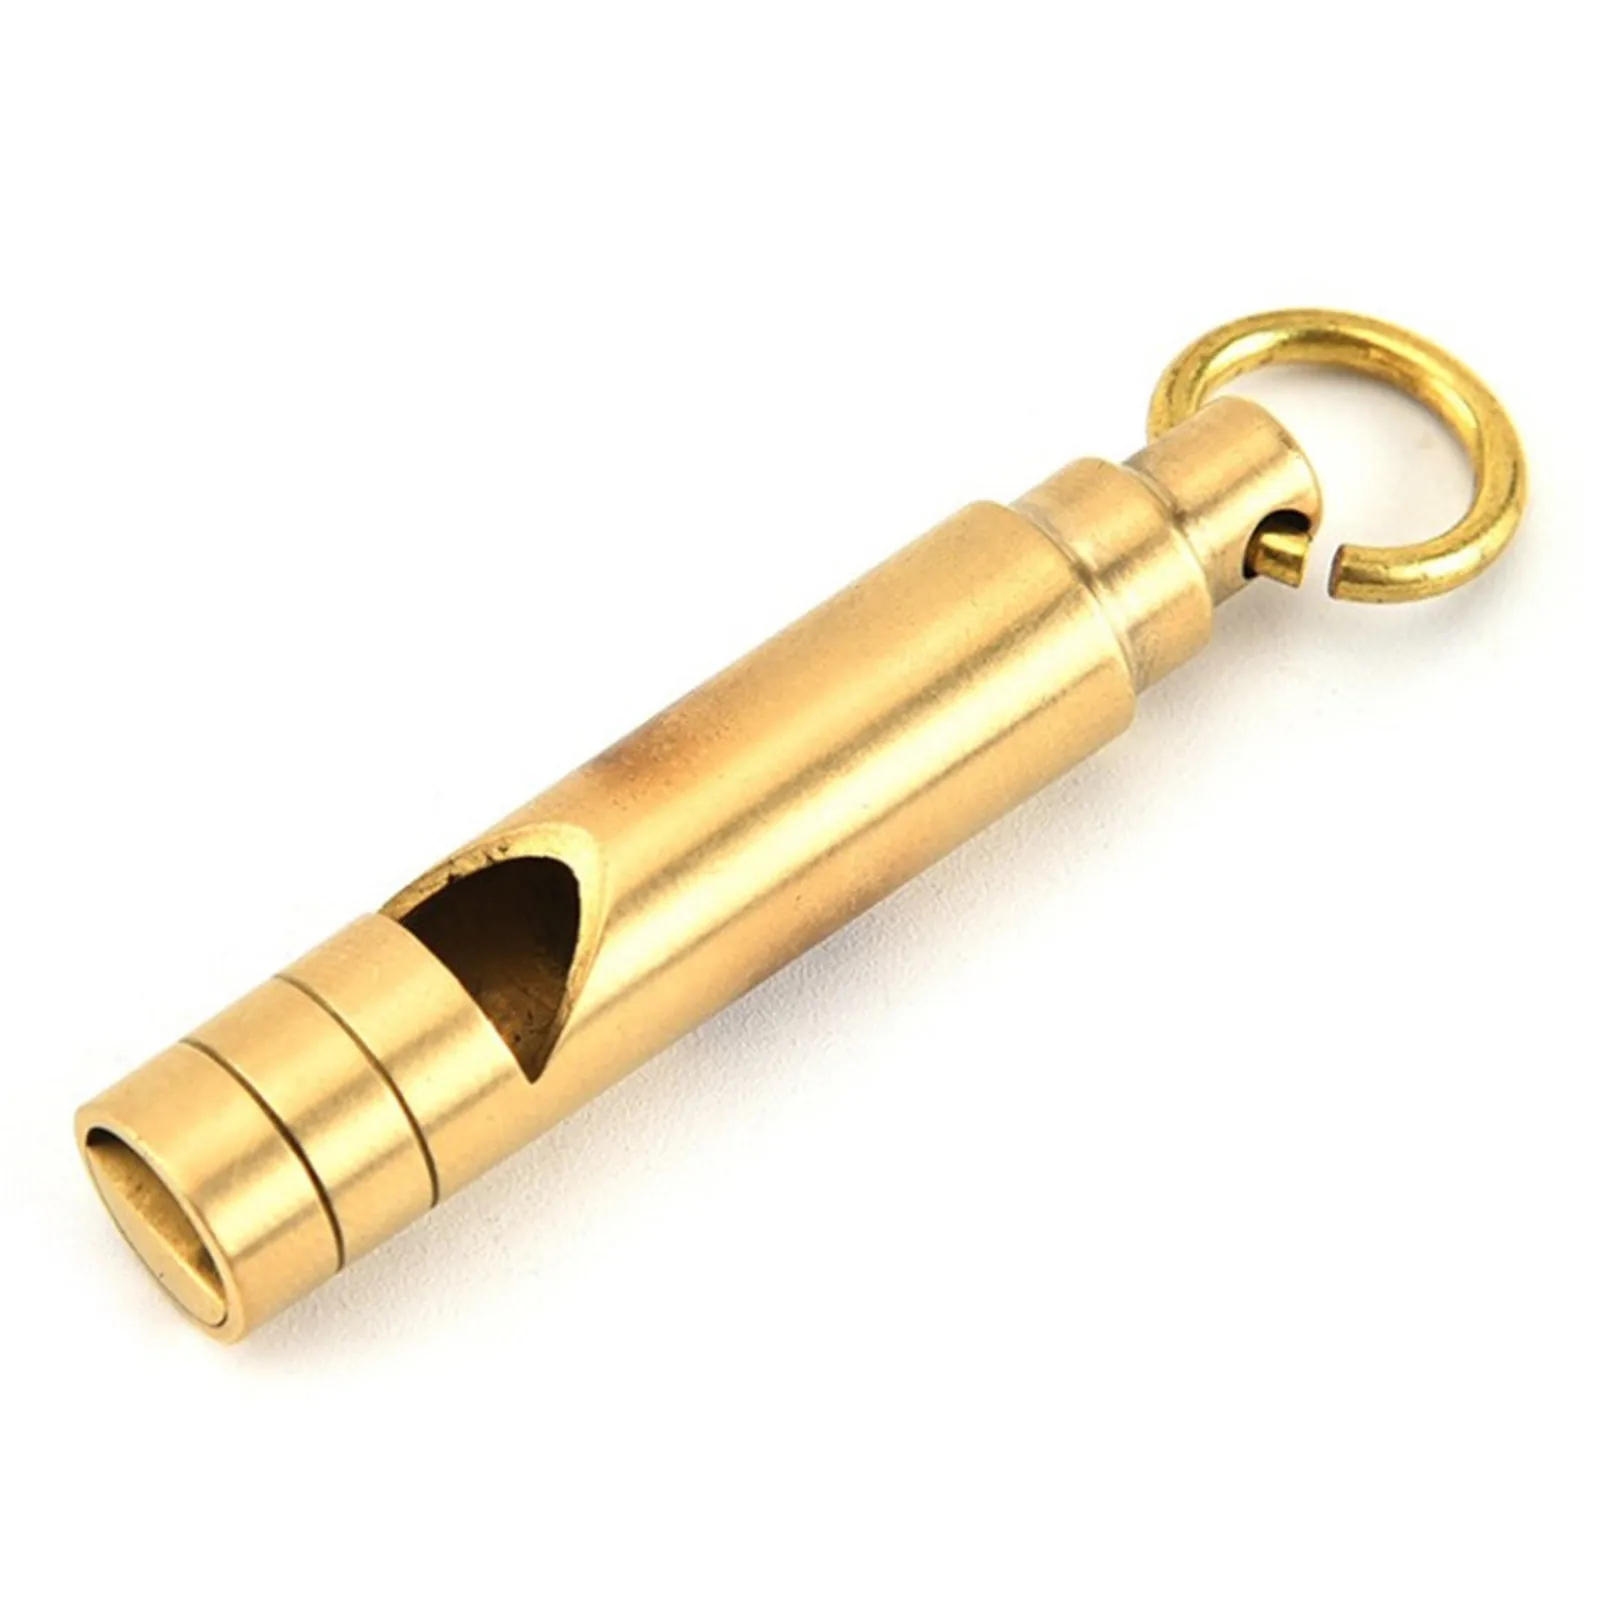 Loudest Brass Whistle Emergency Whistle Outdoor Survival Whistle With Key-Chain 